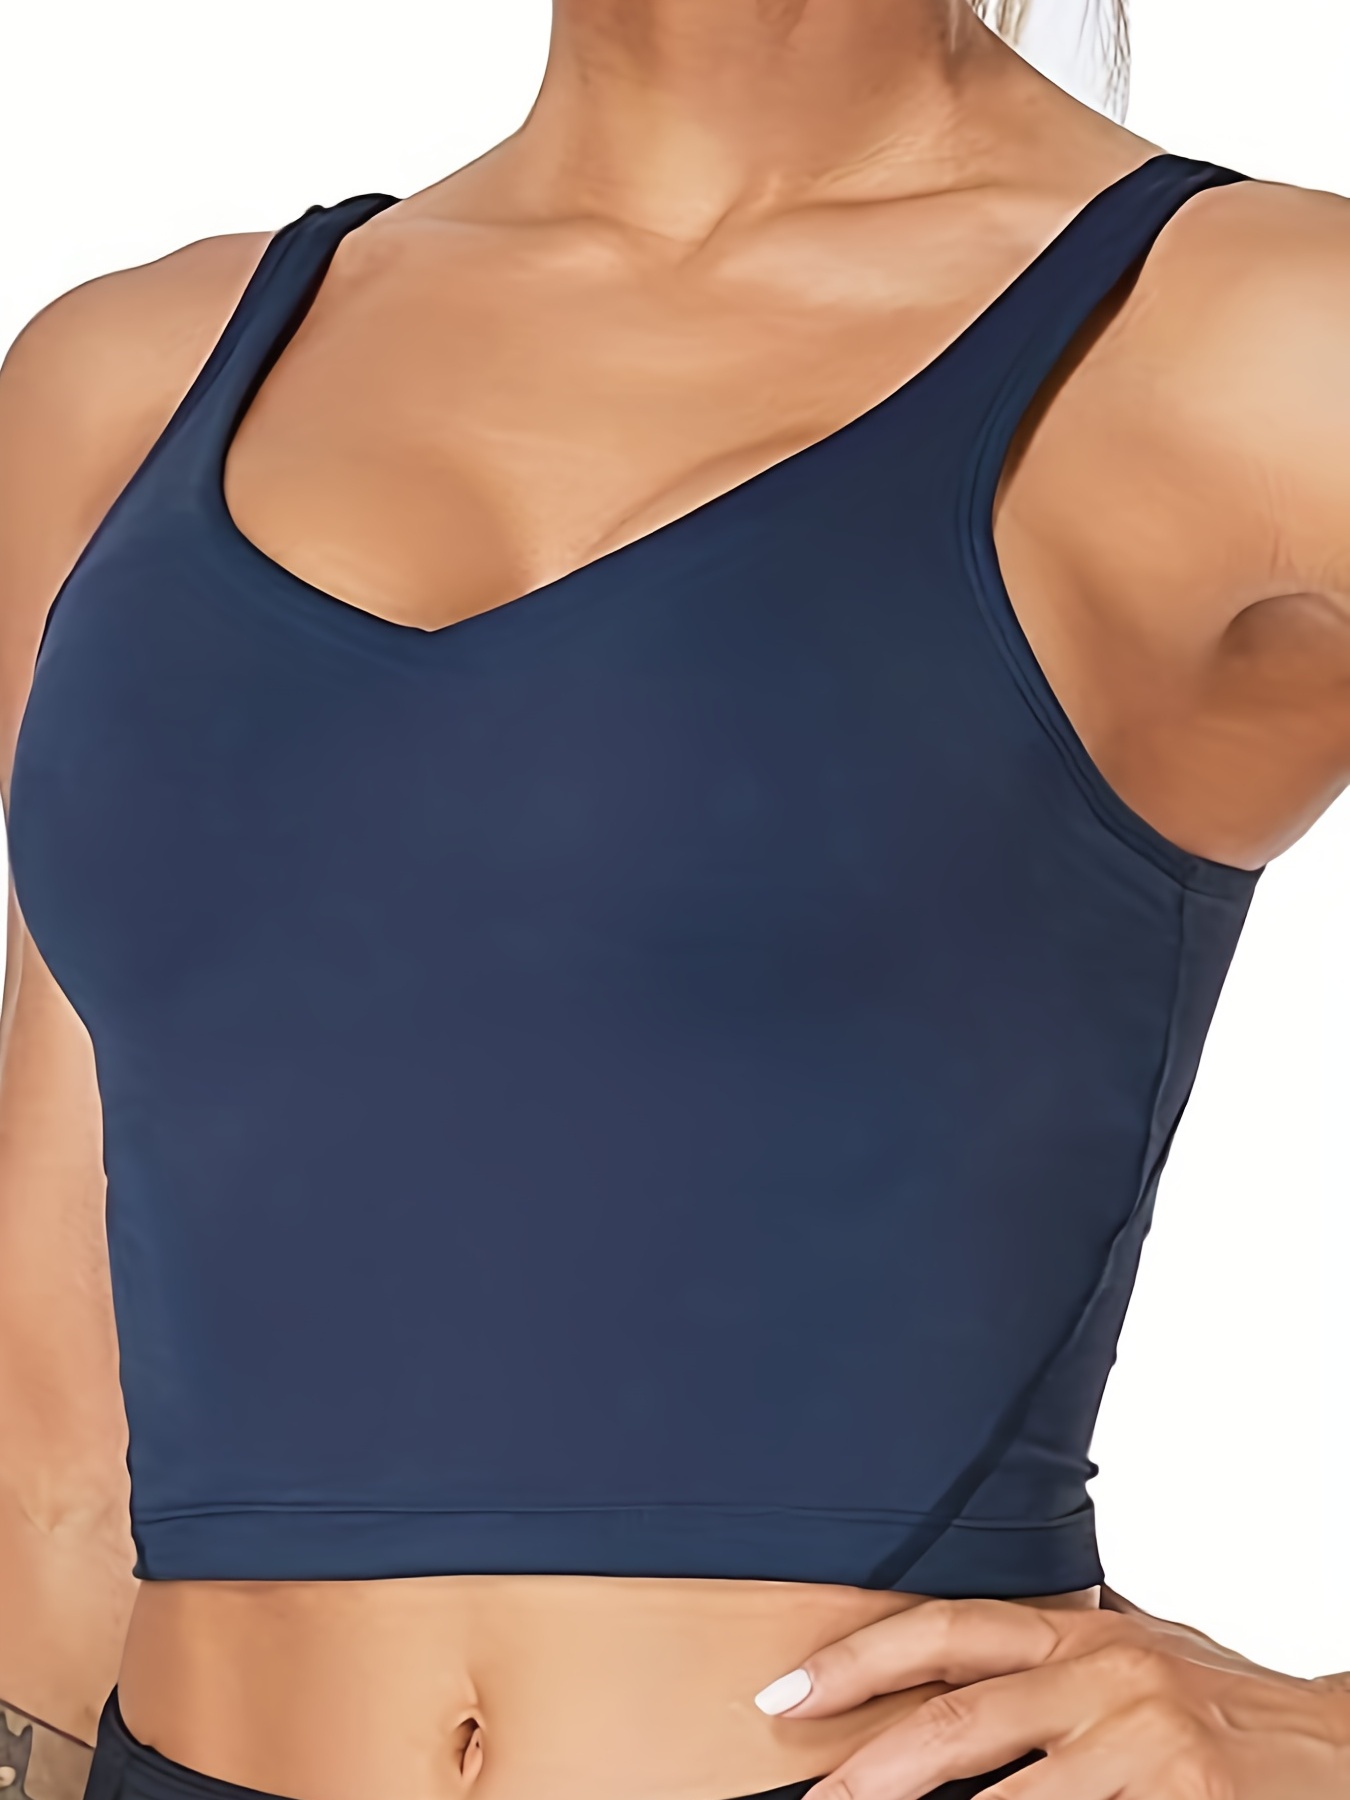 BATHRINS Strappy Sports Bras for Women Padded Wirefree Medium Support  Supportive Longline Workout Yoga Bra